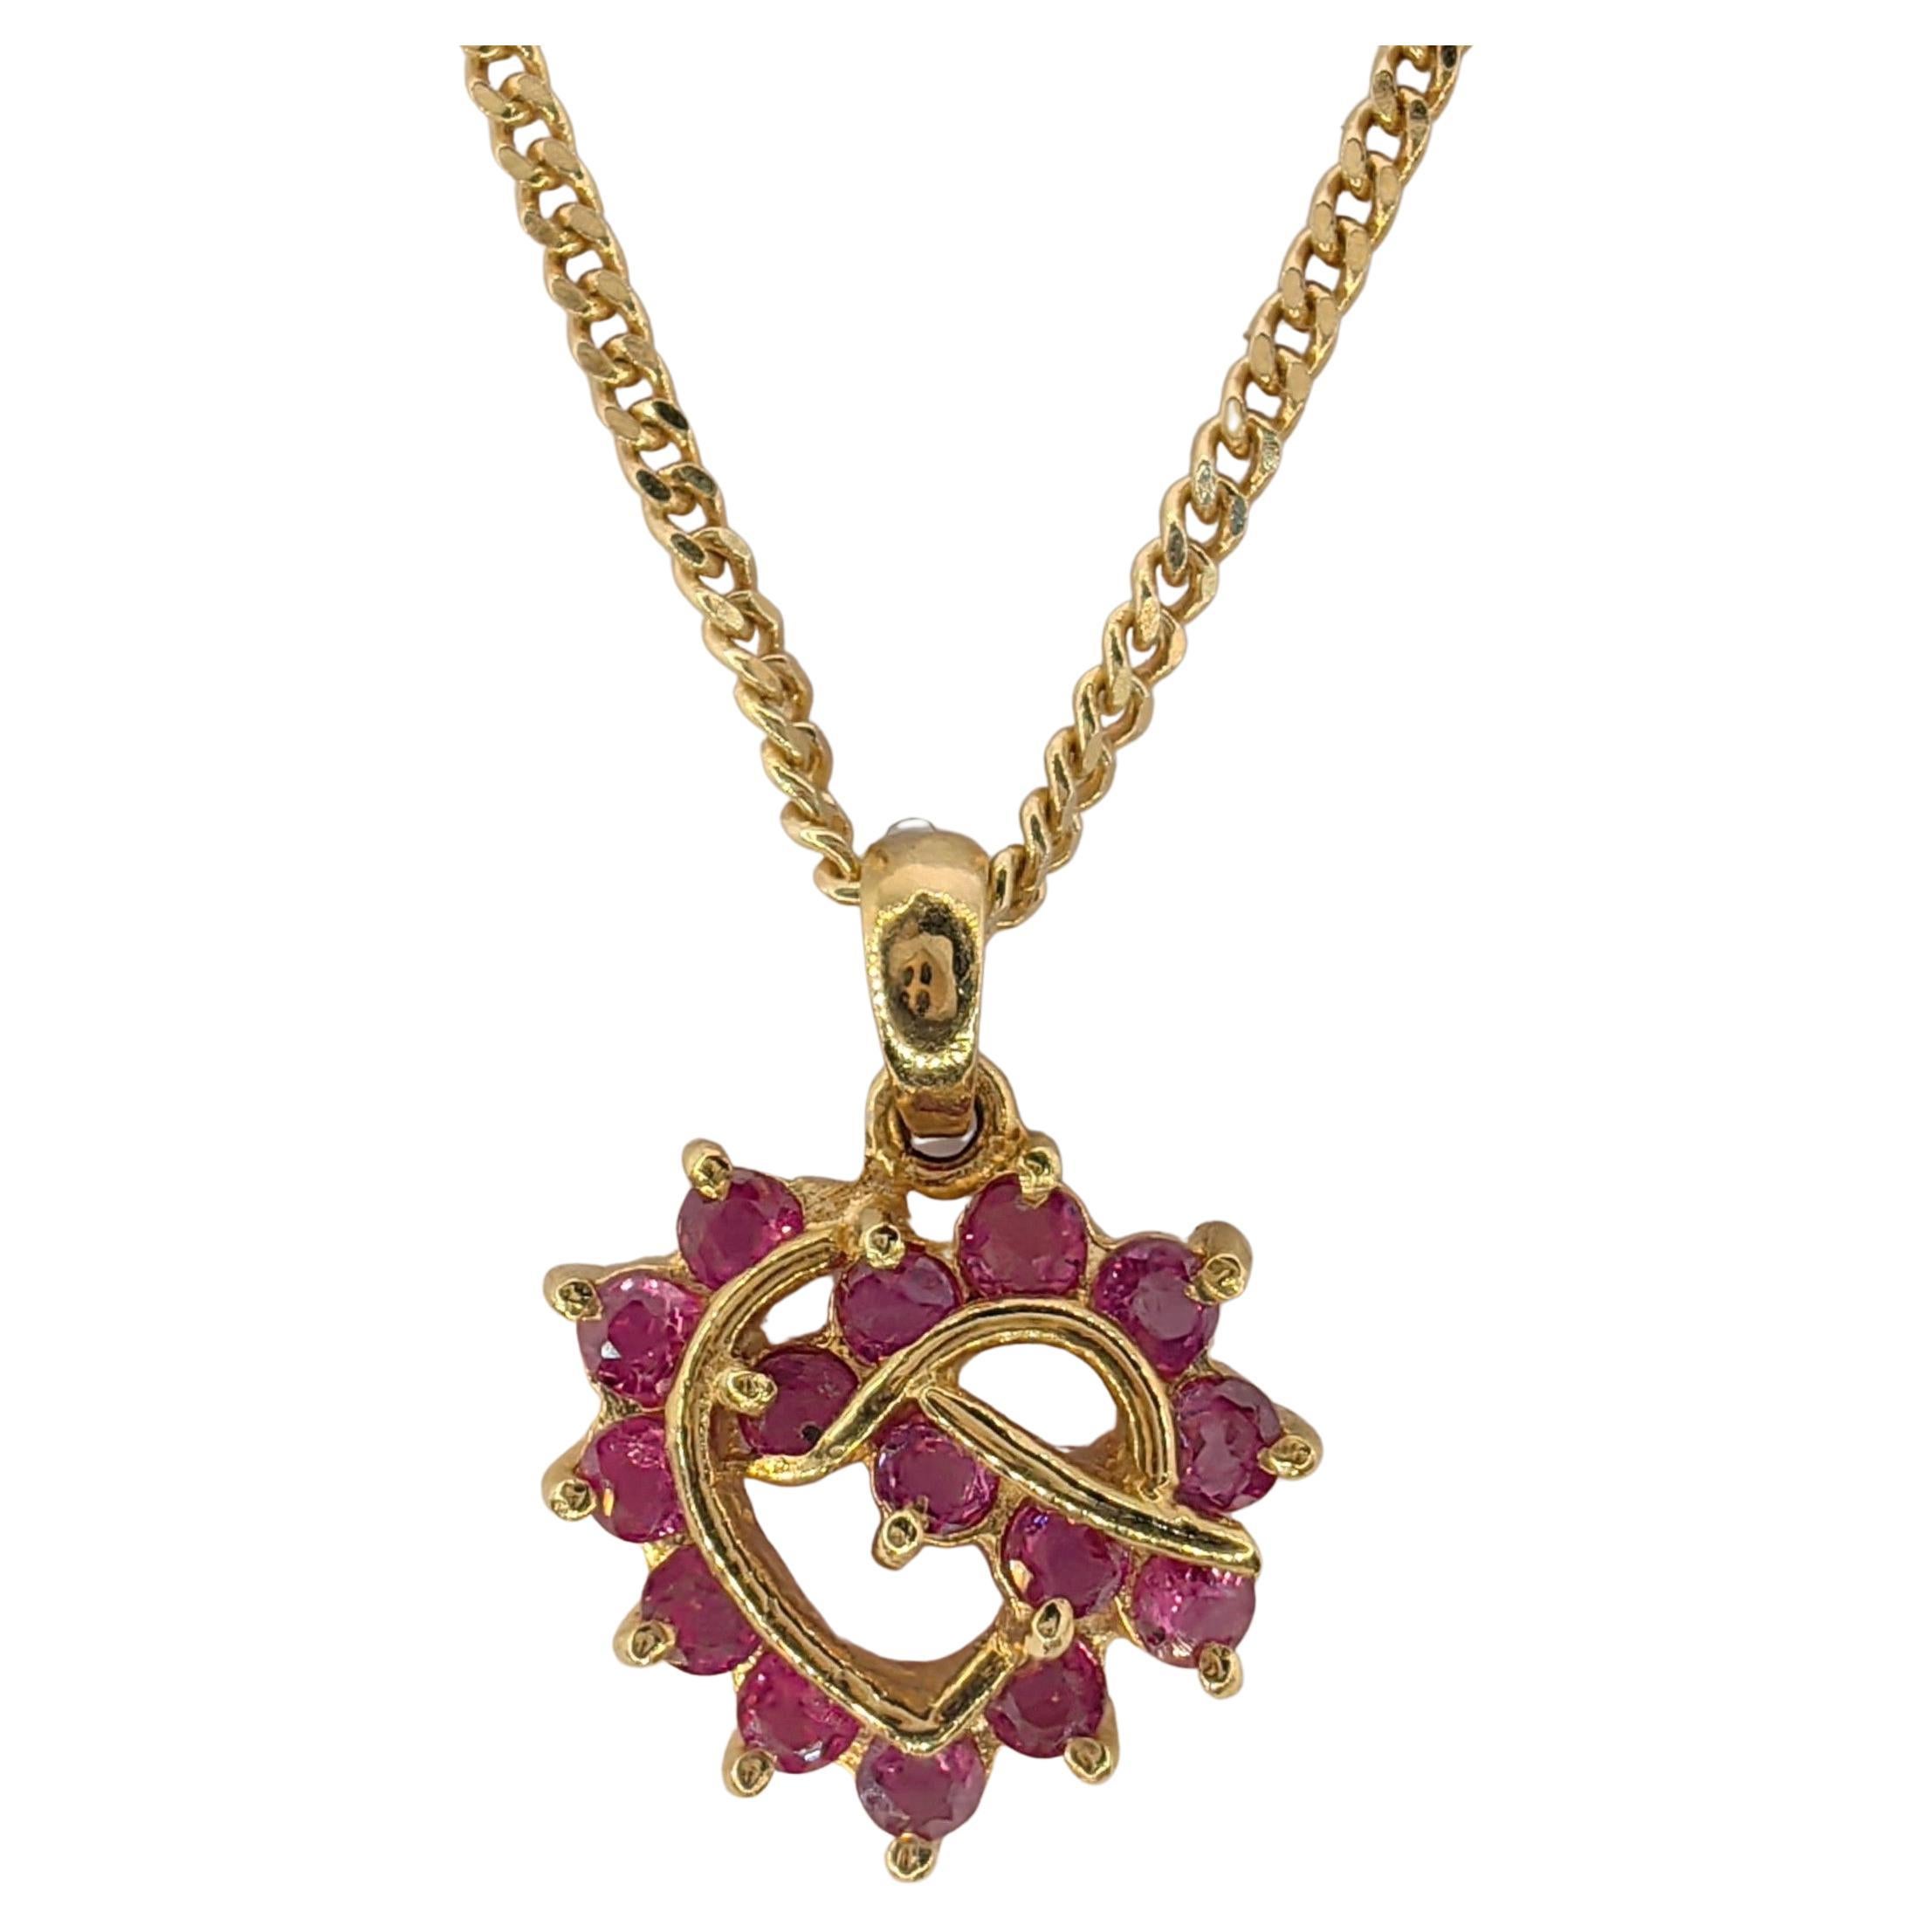 Vintage 1980's Ruby Heart Necklace Pendant in 14k Yellow Gold